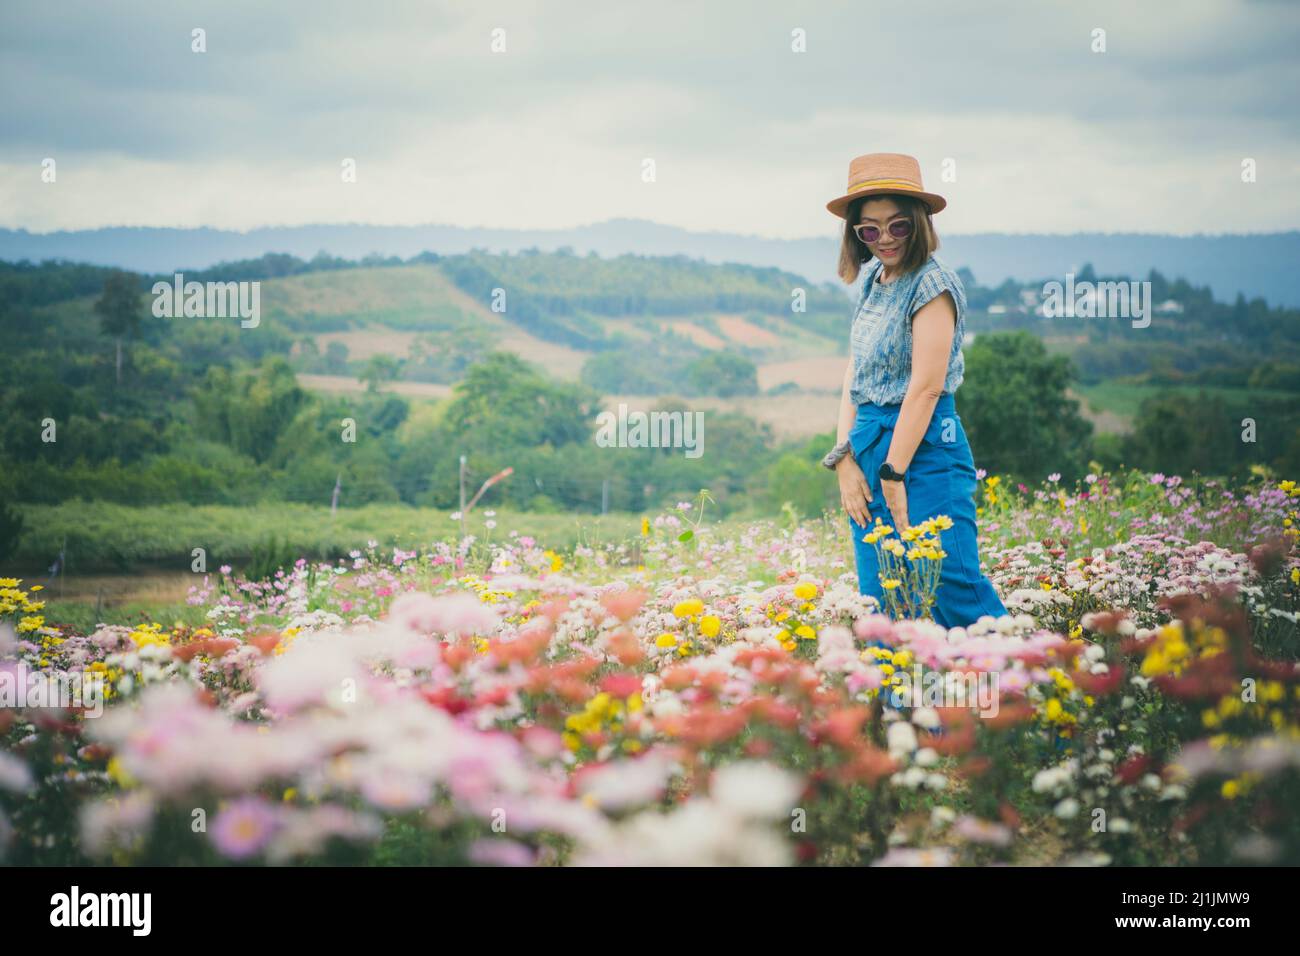 woman standing in blooming flower garden with relaxing mood Stock Photo